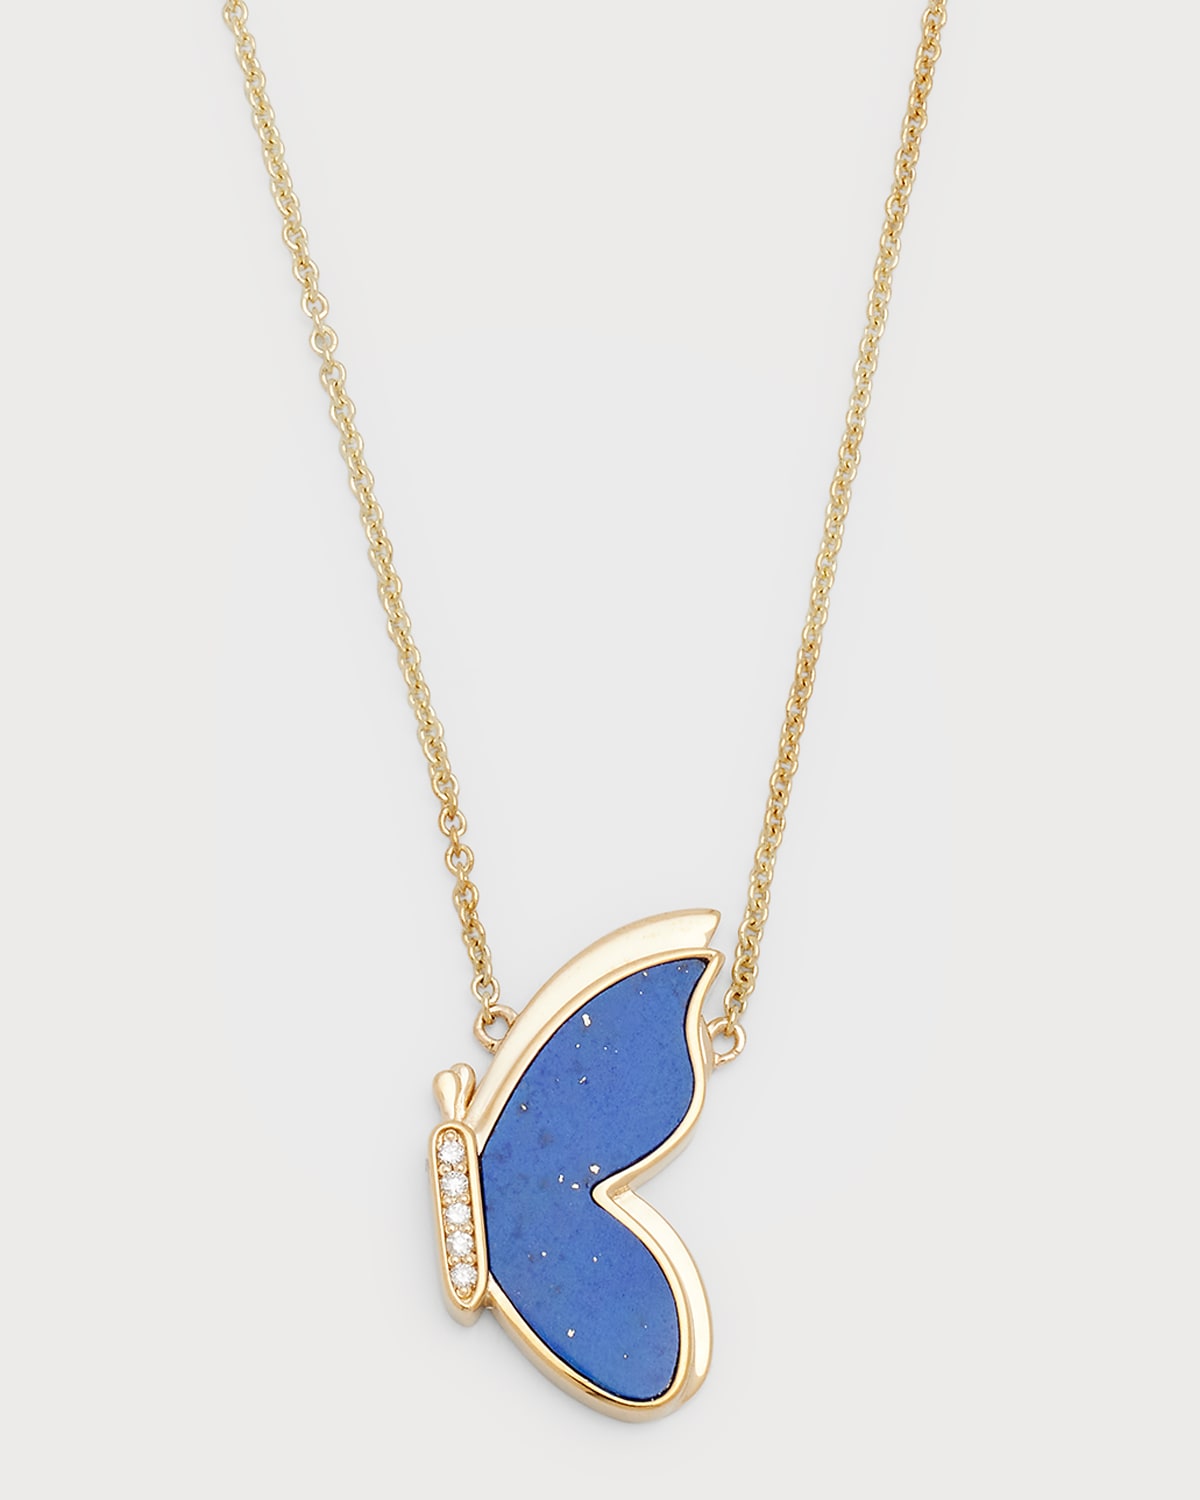 Medium Butterfly in Flight Necklace with Lapis